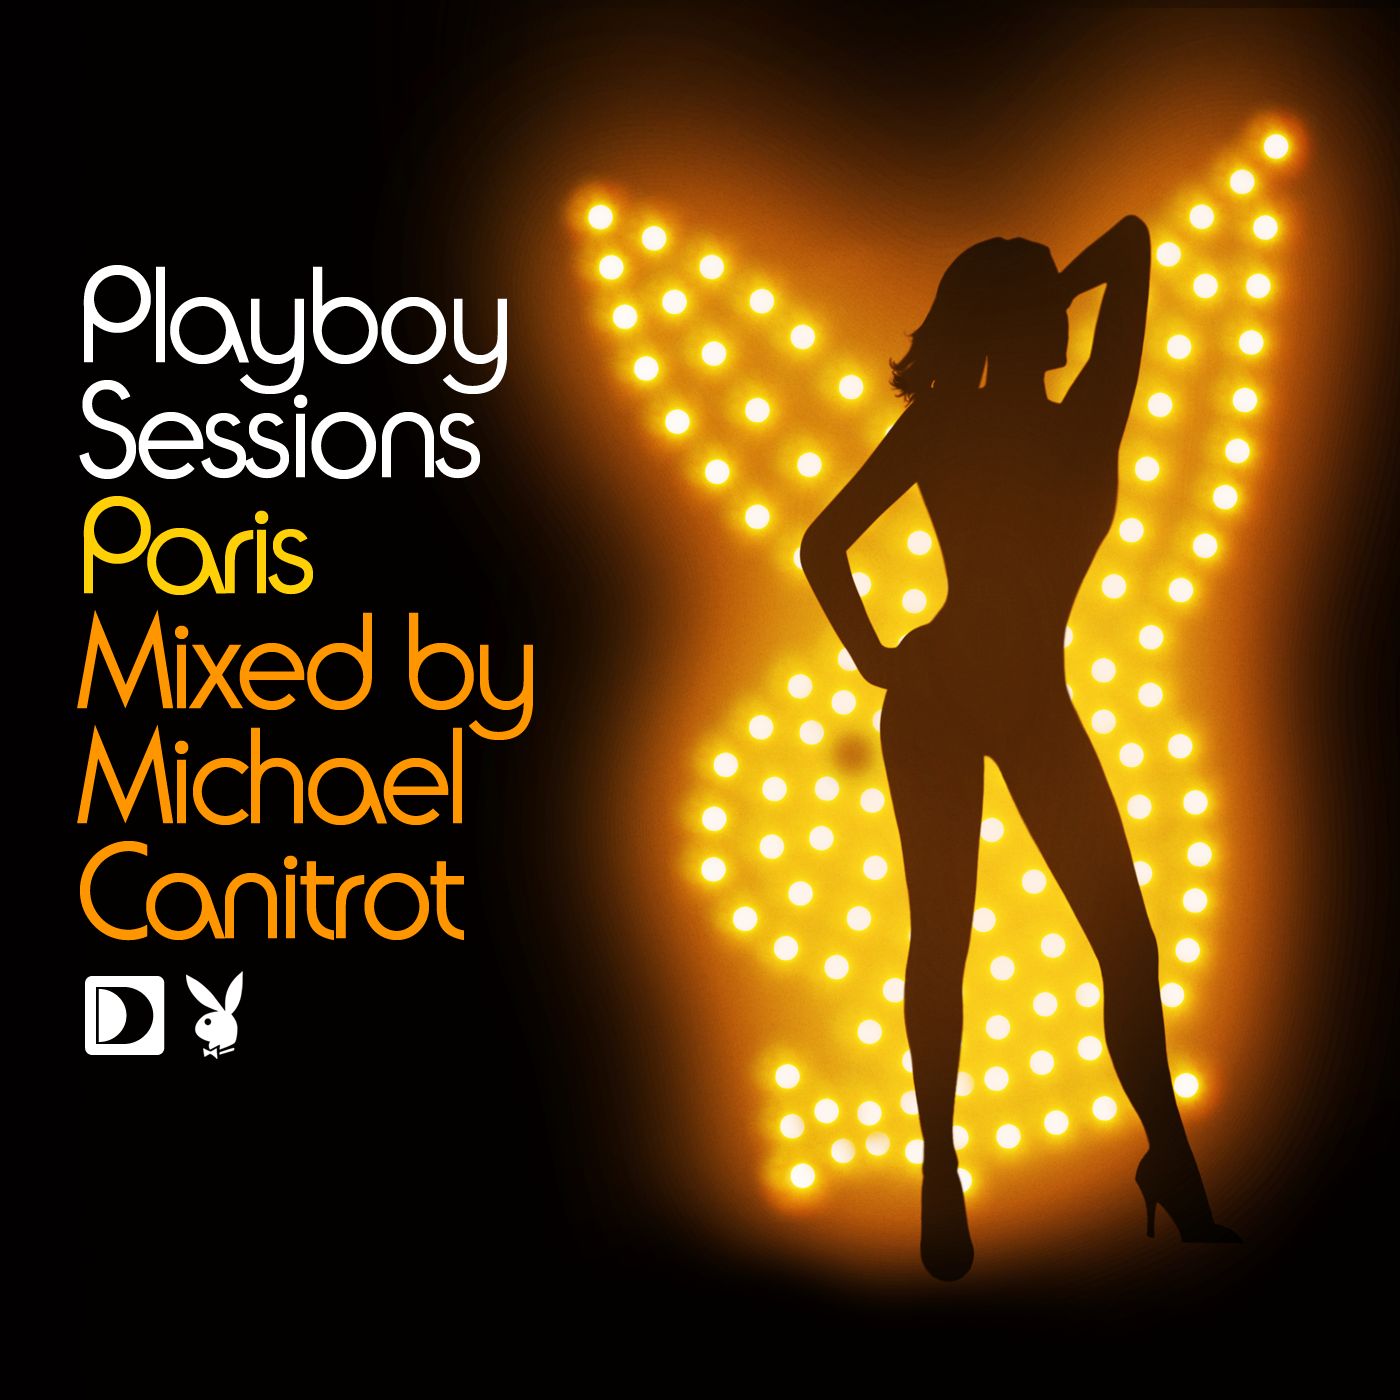 Playboy Sessions: Paris mixed by Michael Canitrot